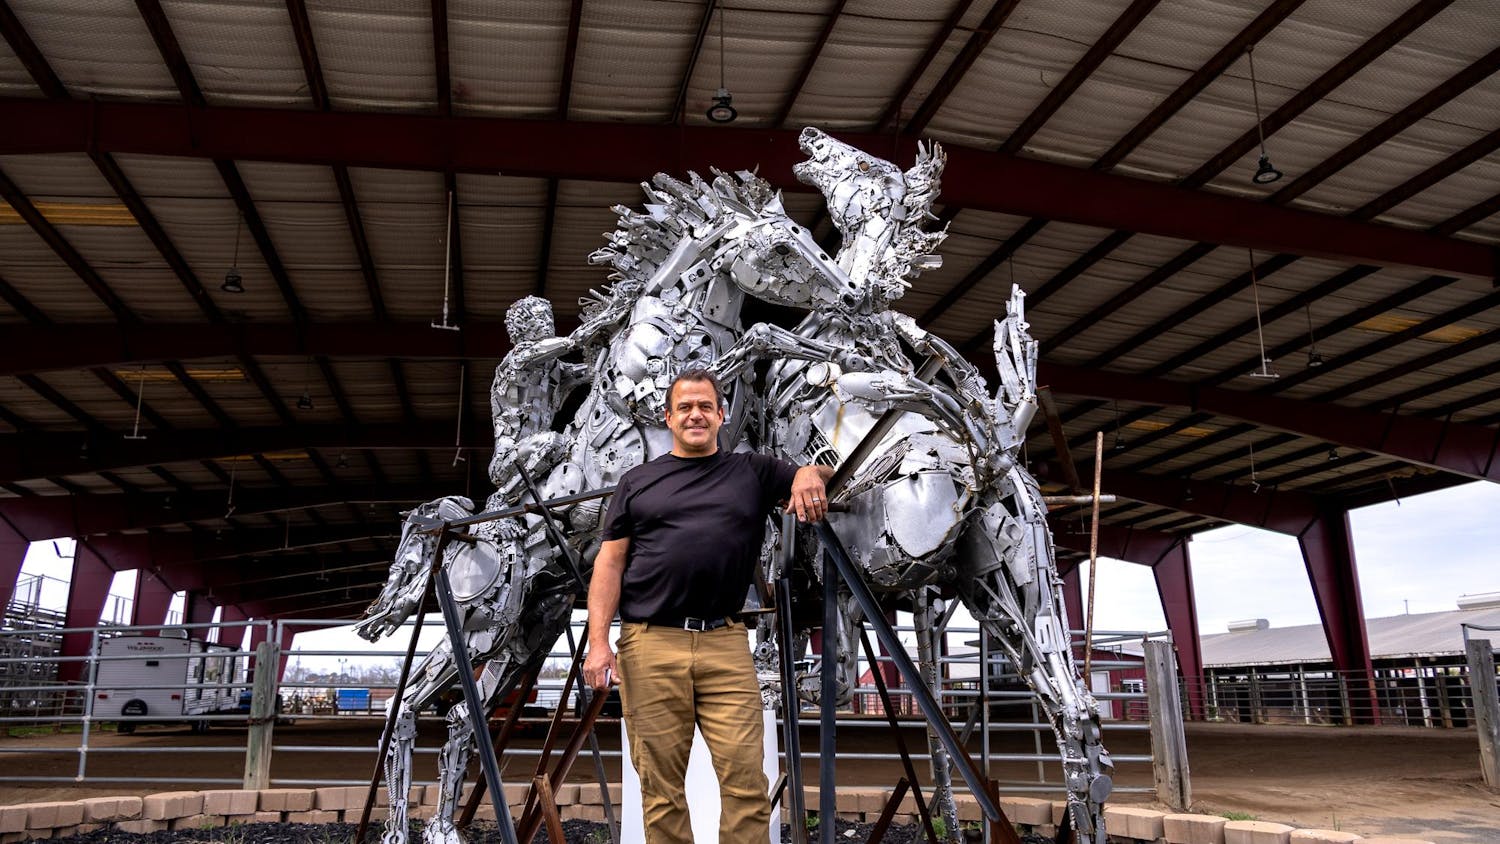 Local artist Thomas Humphries has been creating sculptures out of repurposed items since college. The medium has allowed Humphries to express passion through welding found materials into art, he said. Humphries' work can be found at the Riverbanks Zoo and Garden, South Carolina State Fairgrounds, West Columbia Riverwalk and other spaces throughout Columbia.